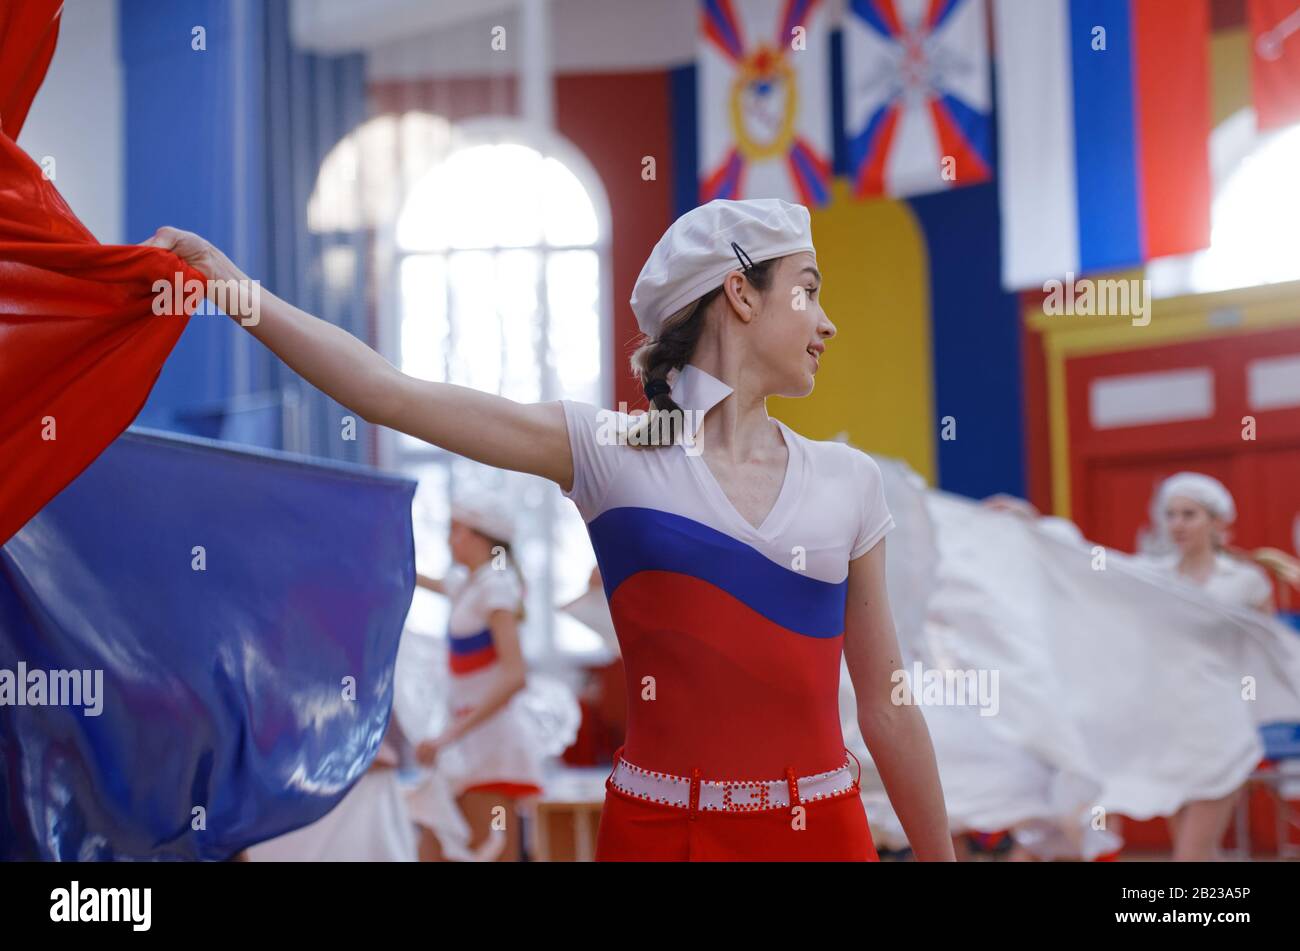 Gymnasts performing with flags at the opening ceremony of the Russian Weightlifting Cup competitions in St. Petersburg, Russia Stock Photo